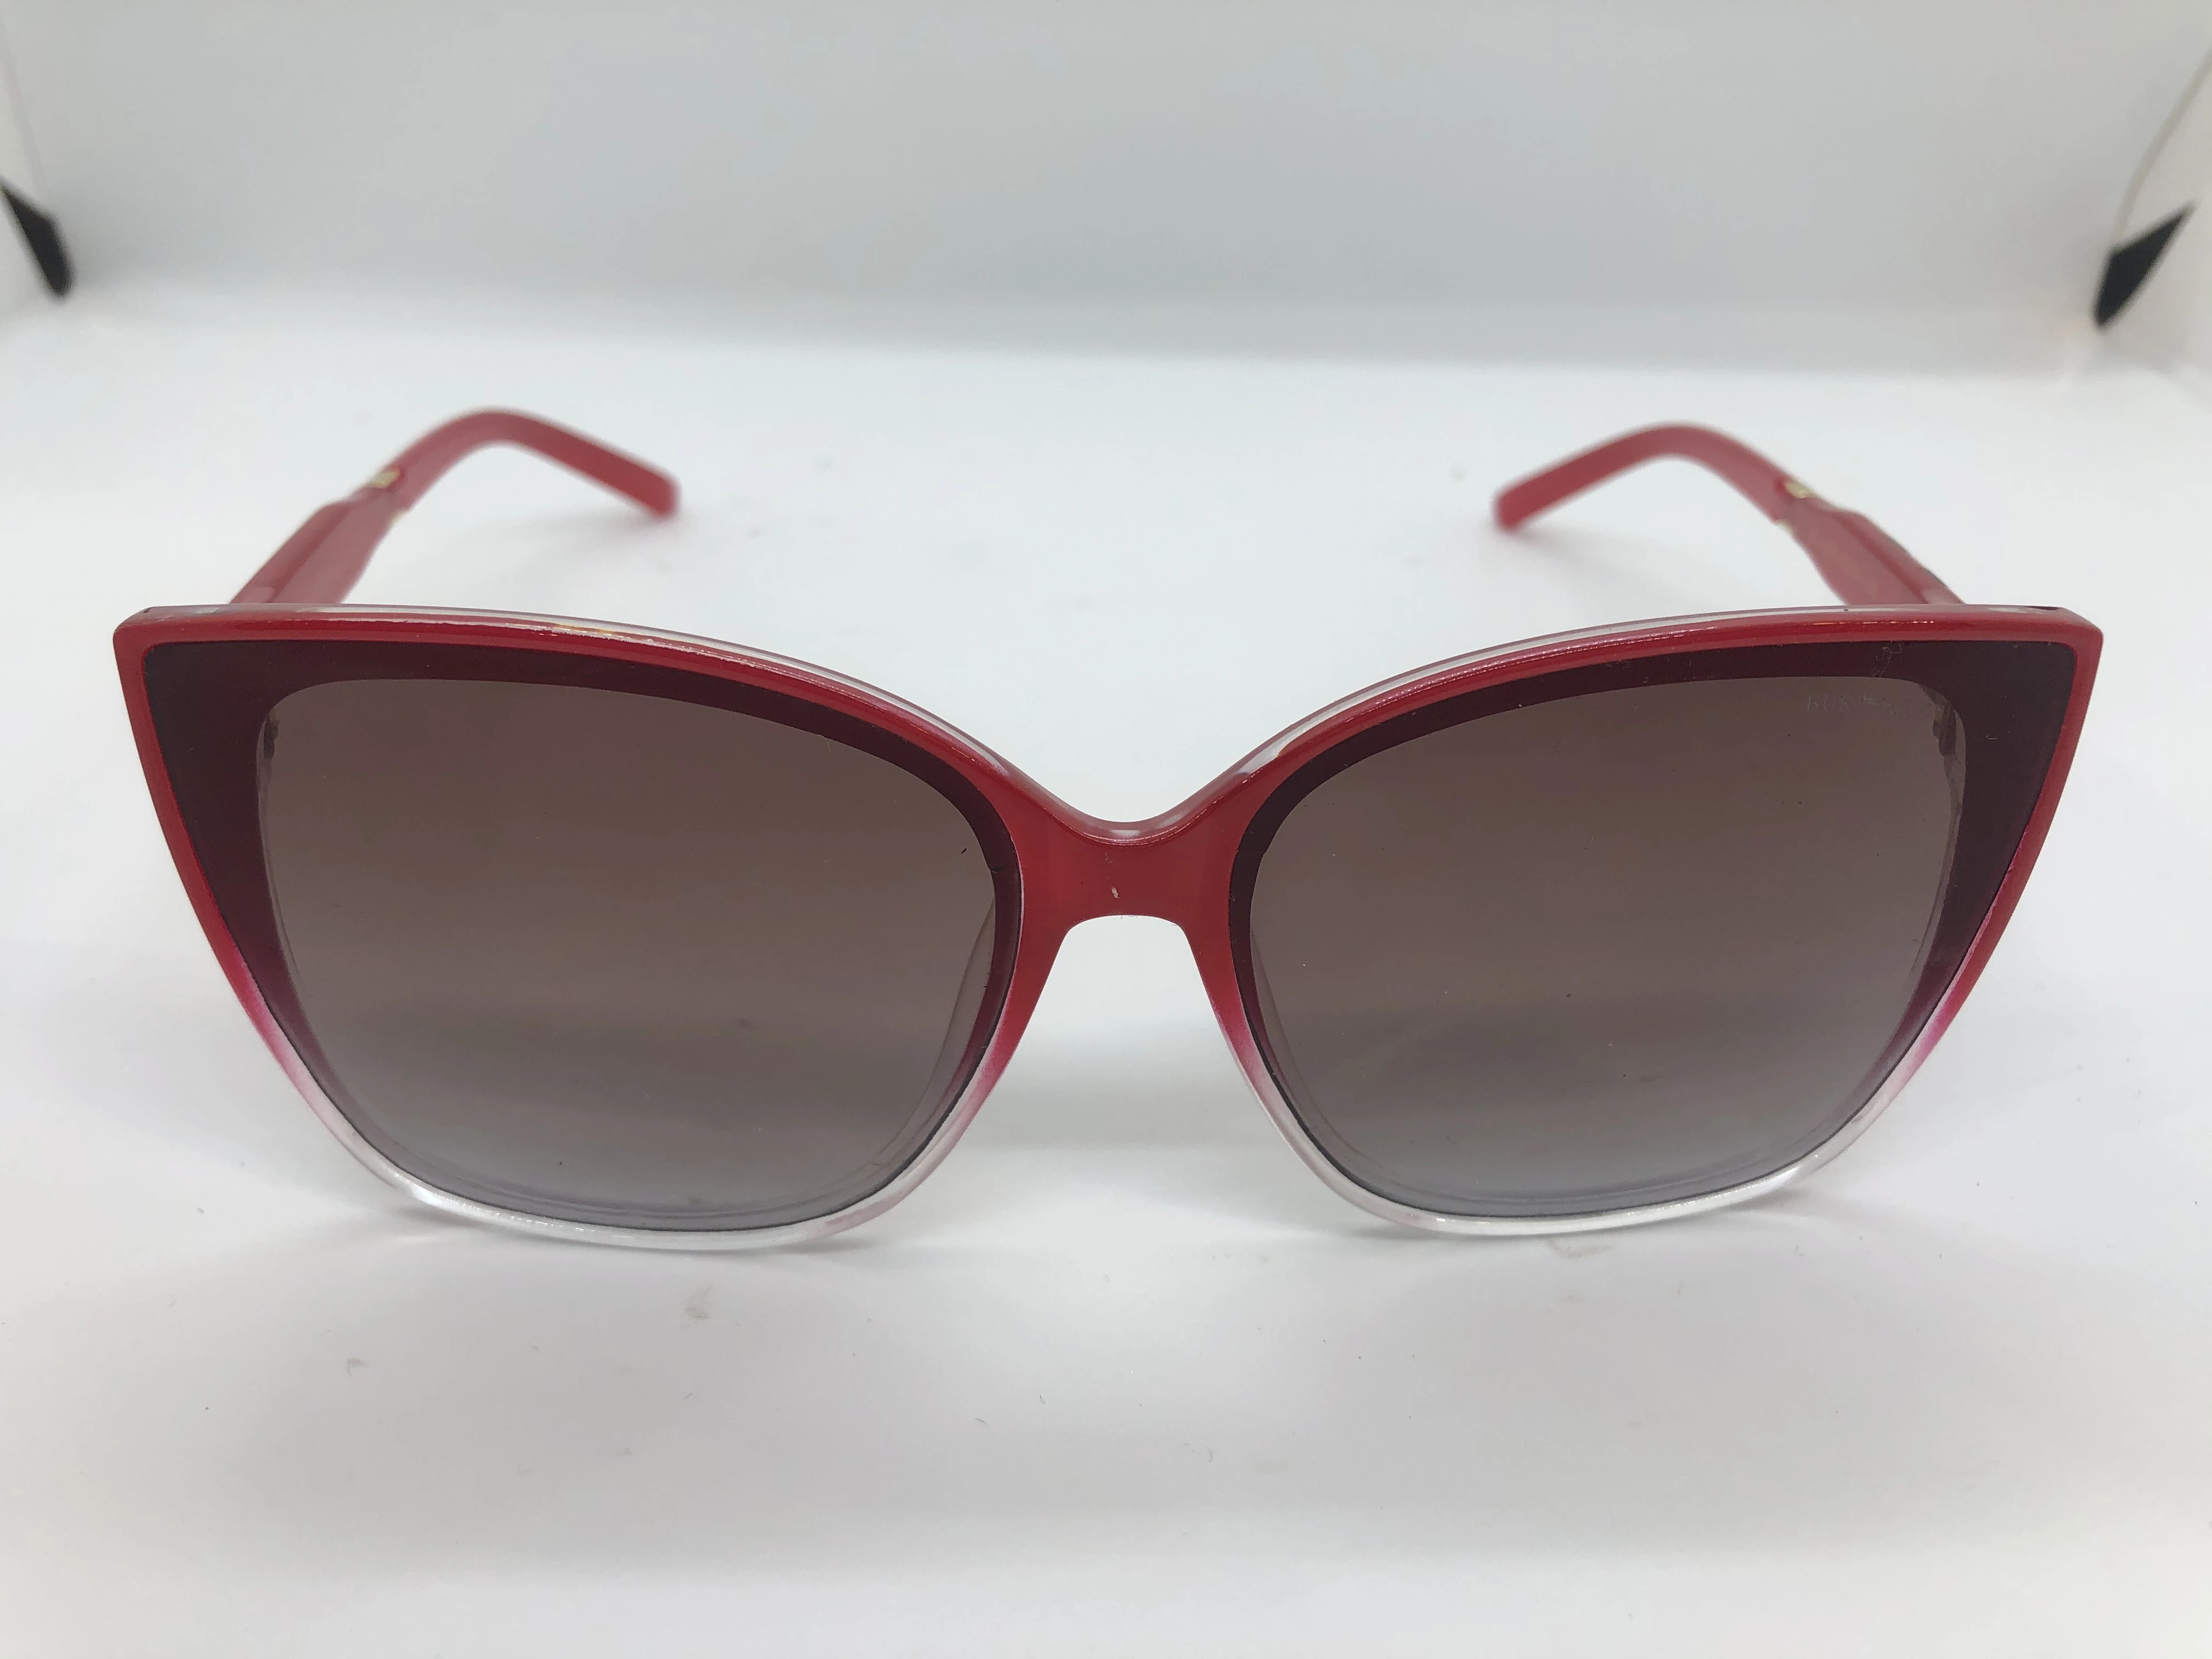 sunglasses - from Burberry - with a red frame with graduated polycarbonate - black gradient lenses - and red polycarbonate arms * Burberry - with the brand logo - for women